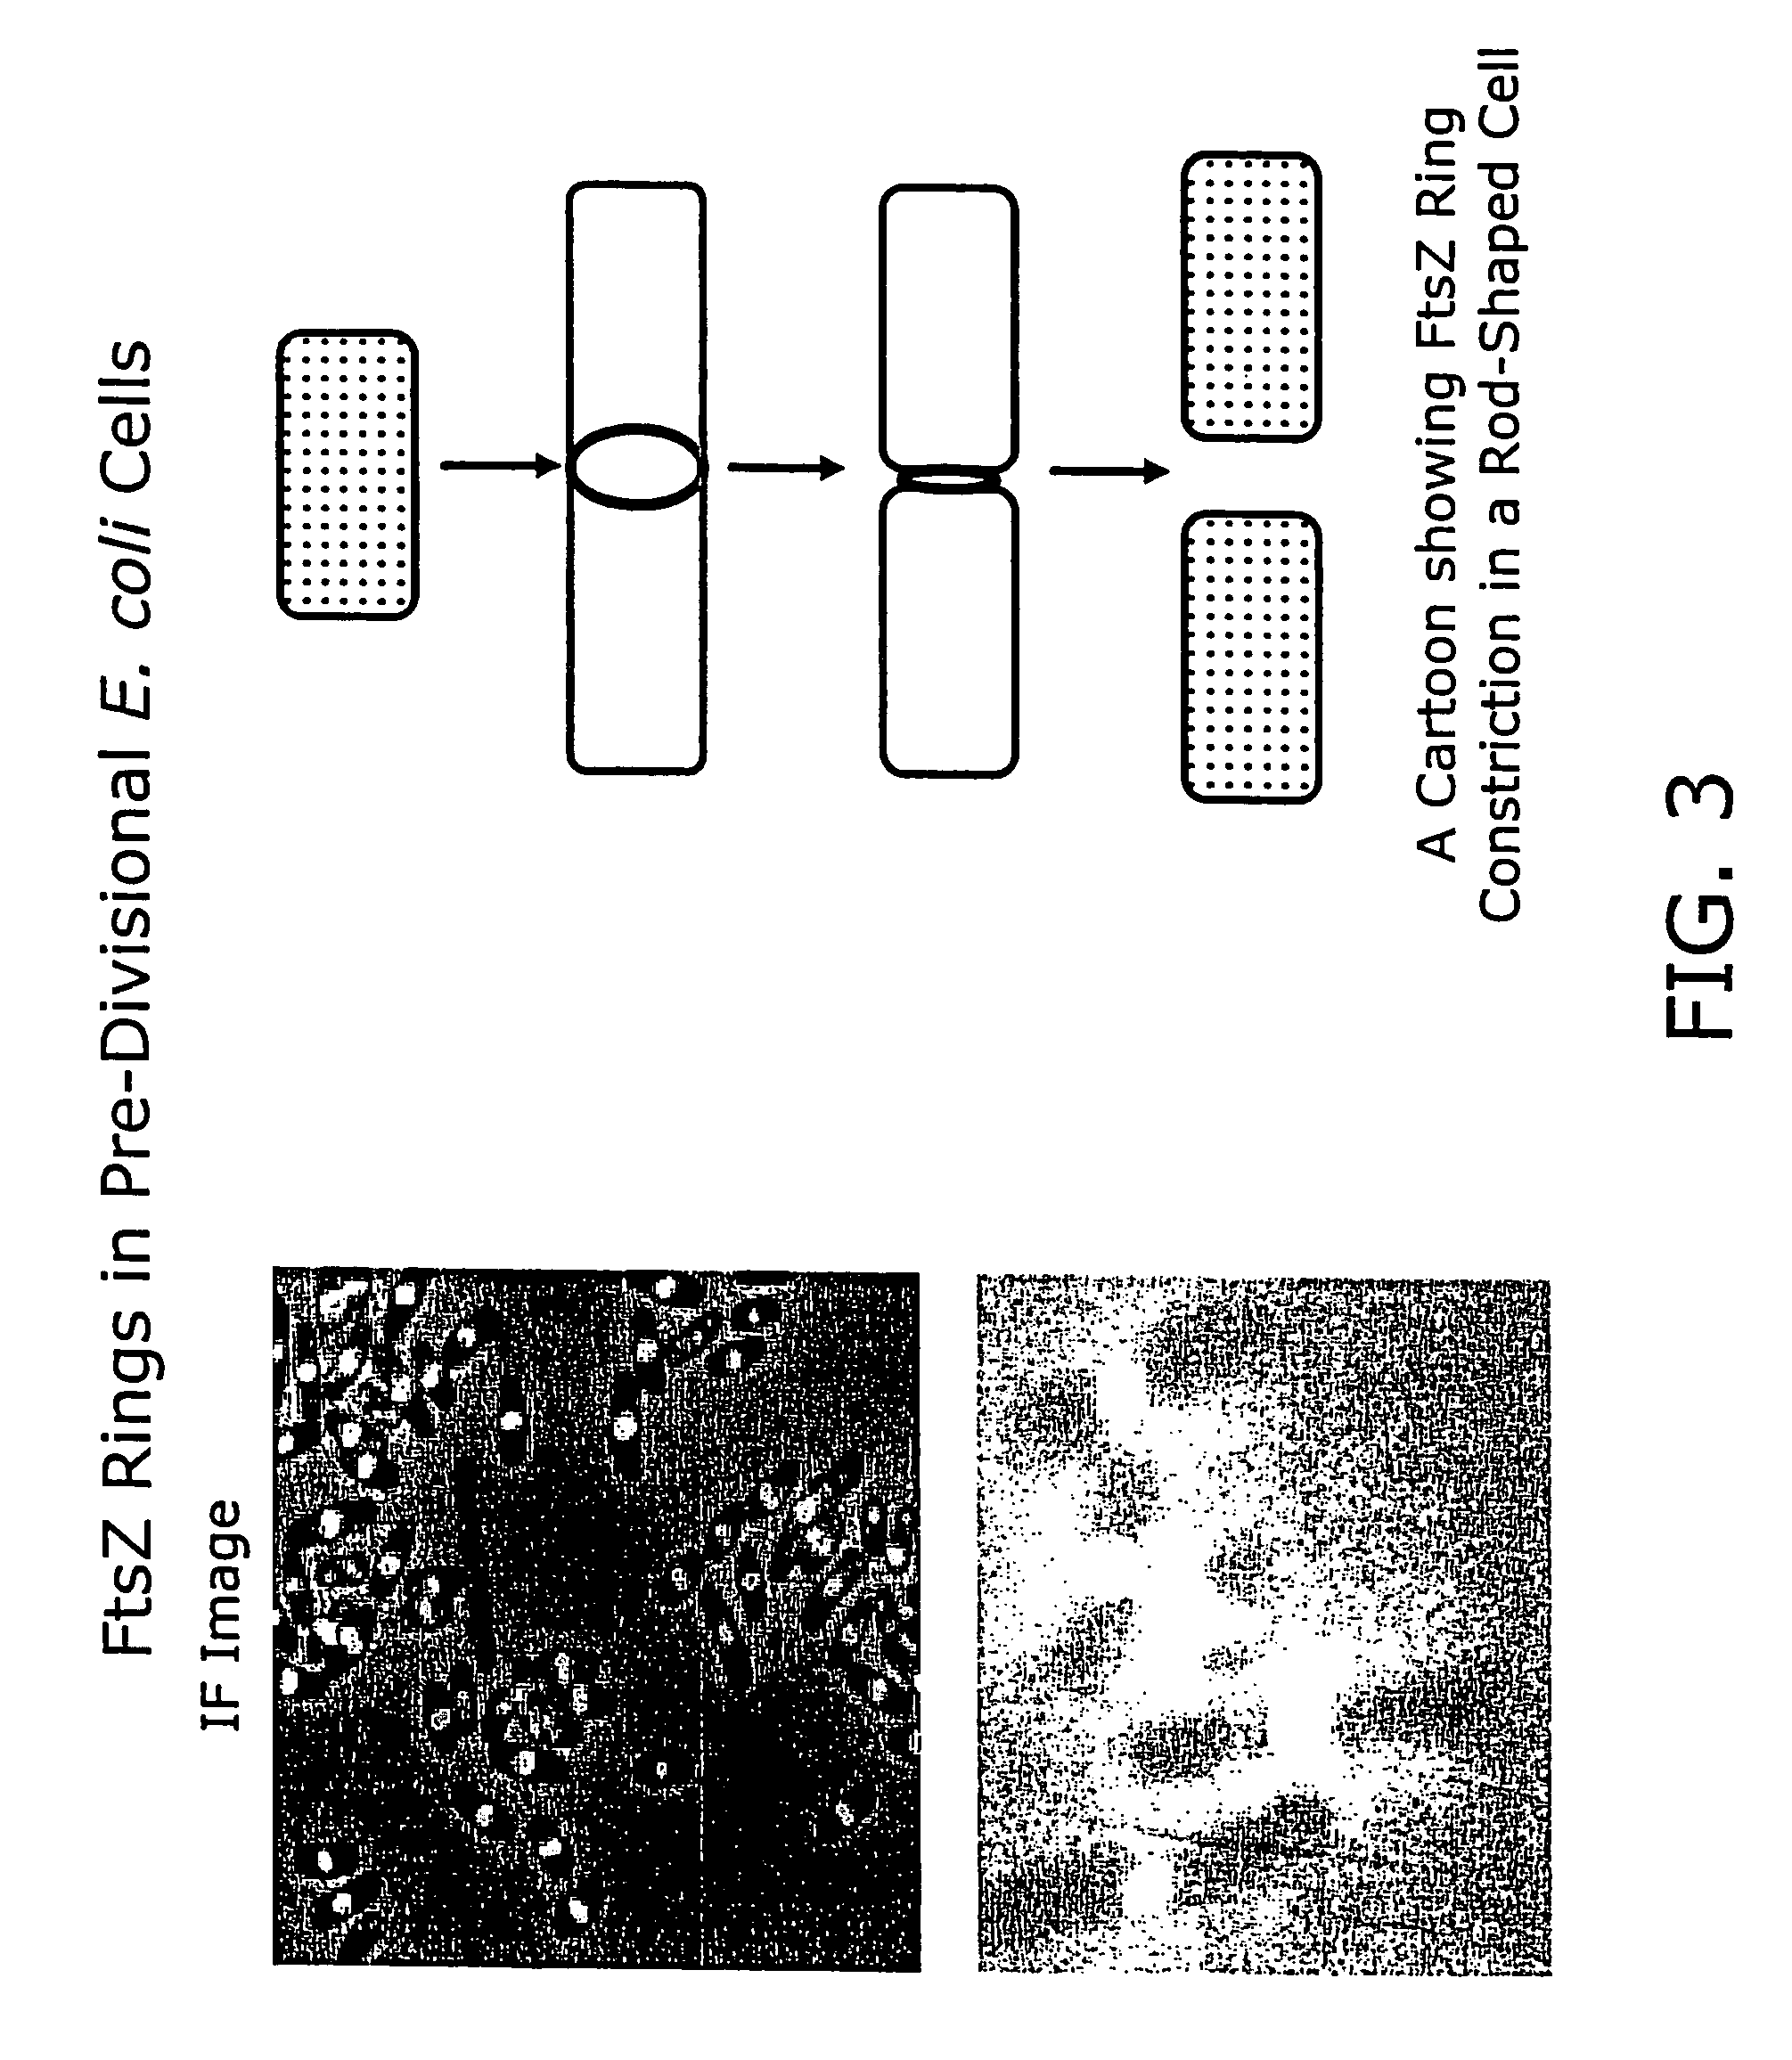 Compound combinations for inhibiting cell division and methods for their identification and use